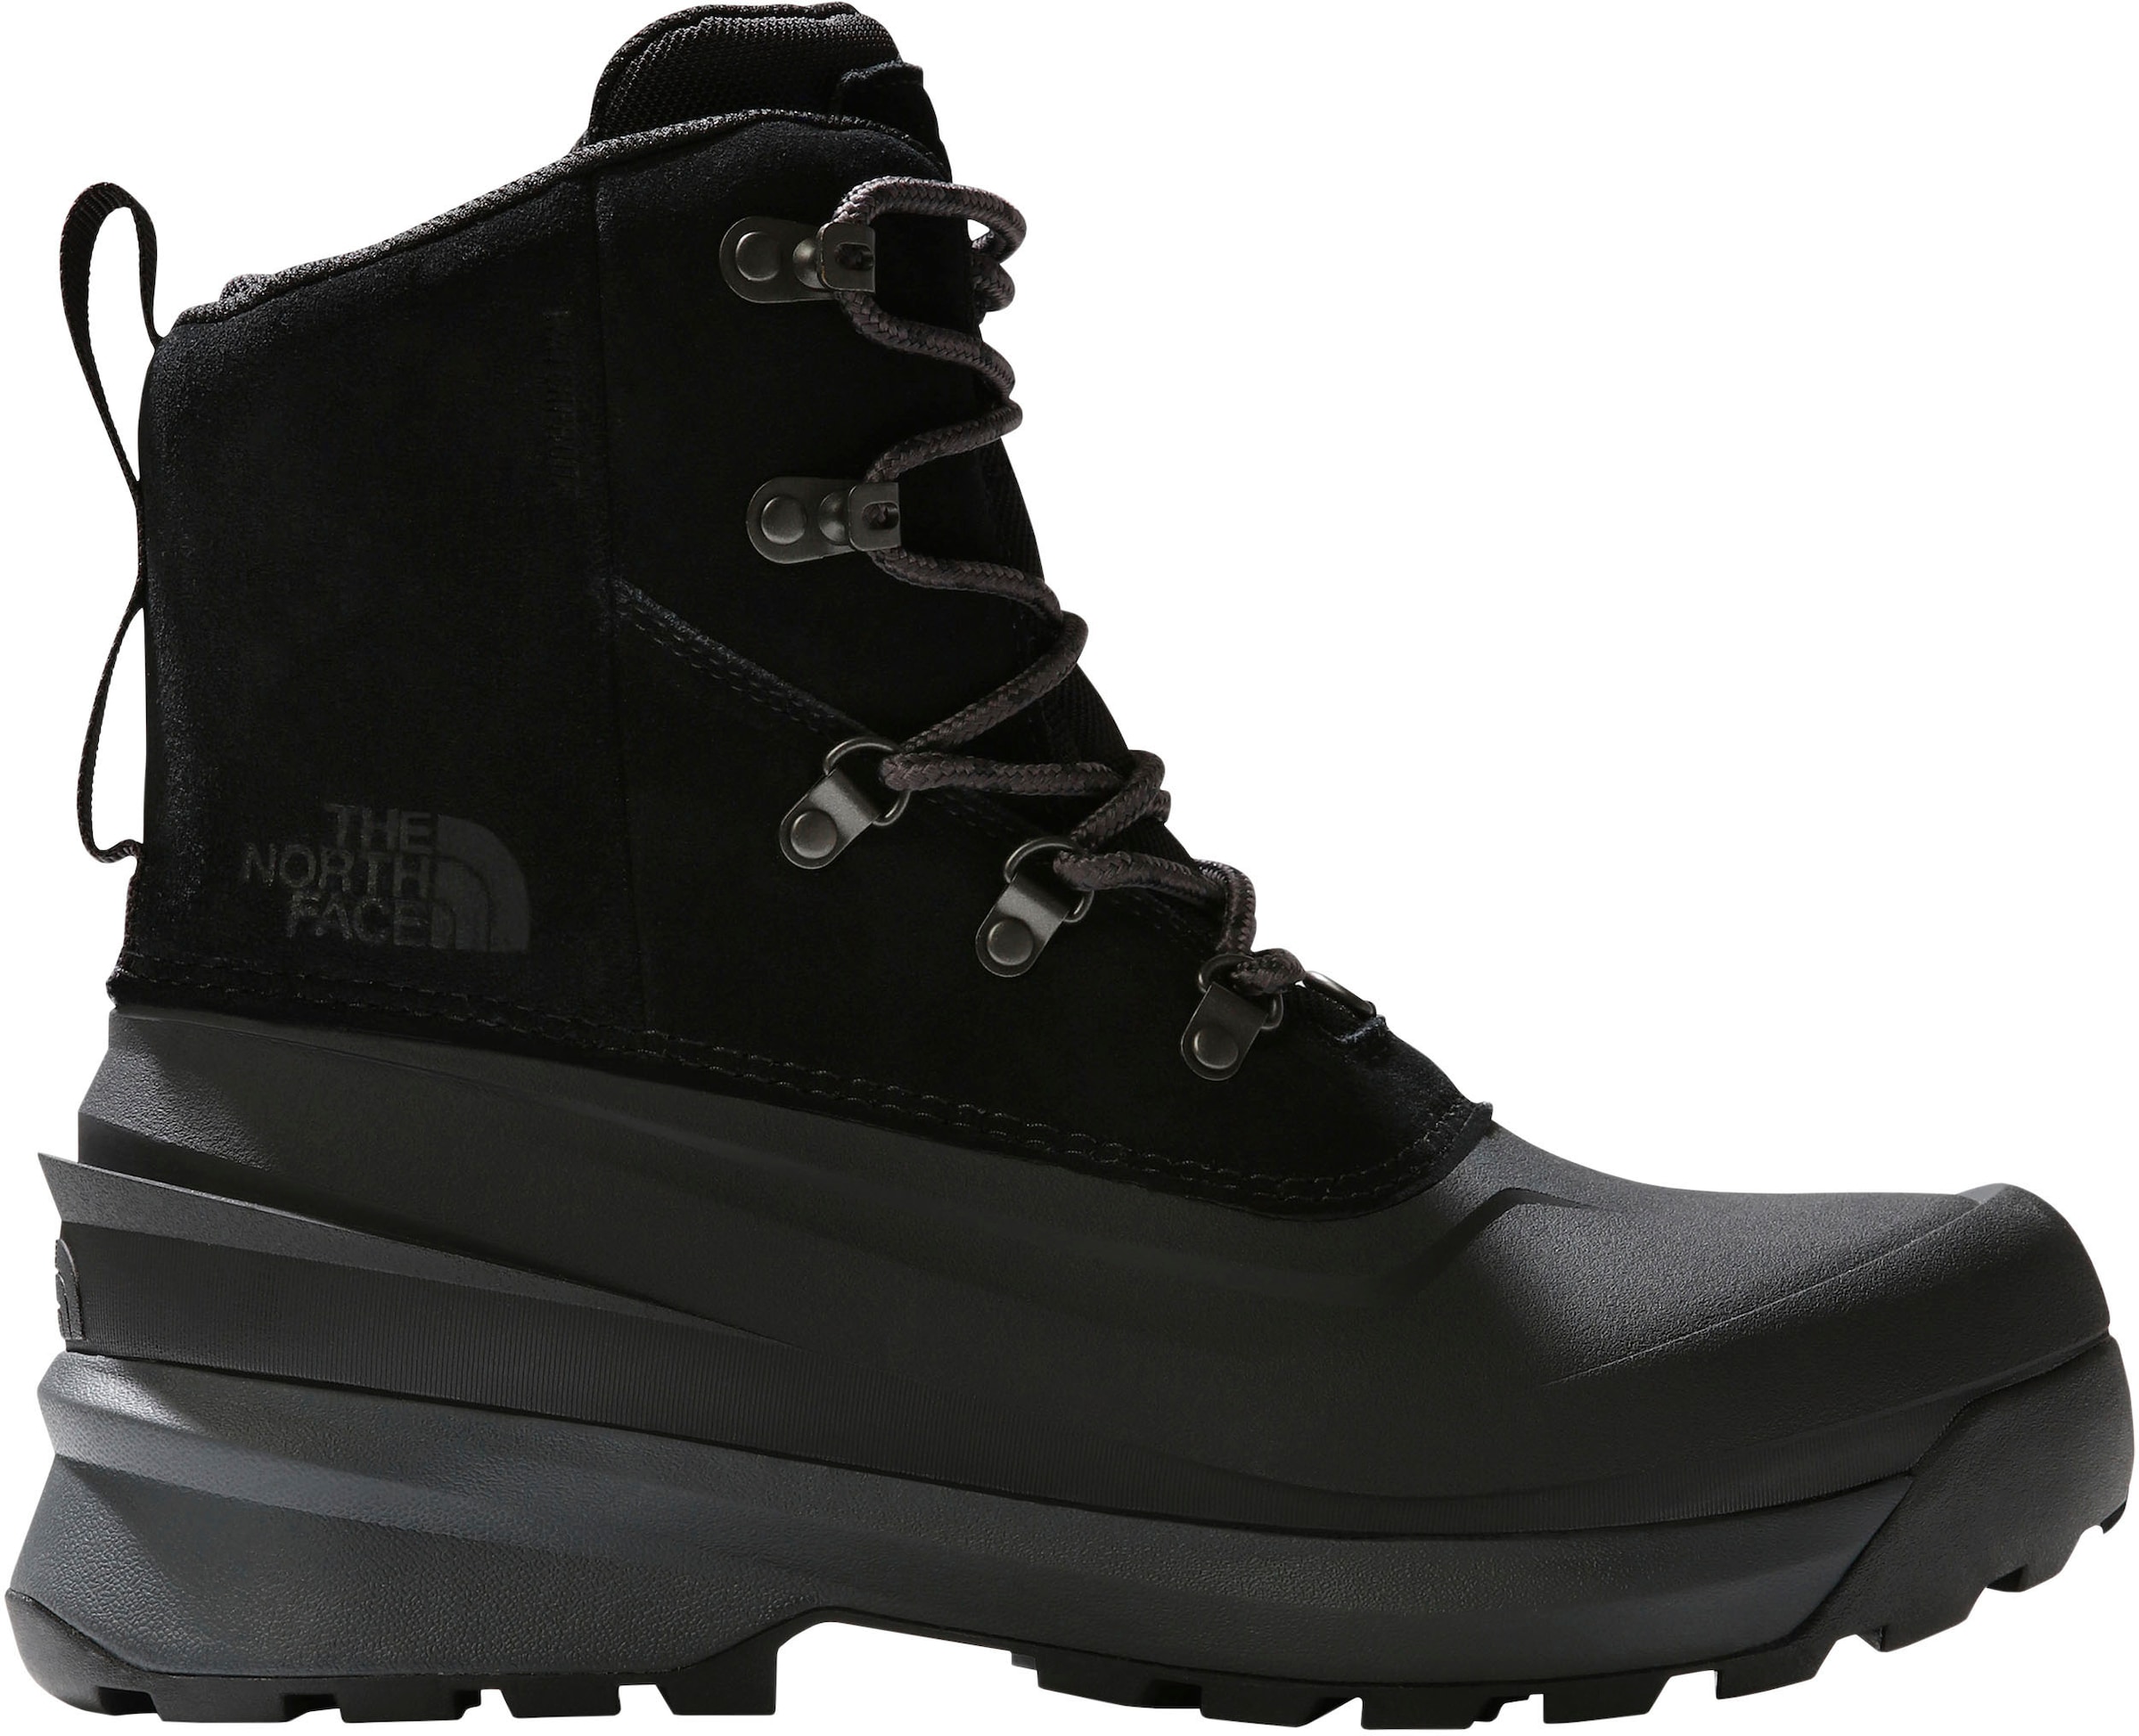 The North Face Winterstiefel »M CHILKAT V LACE WP« wa...